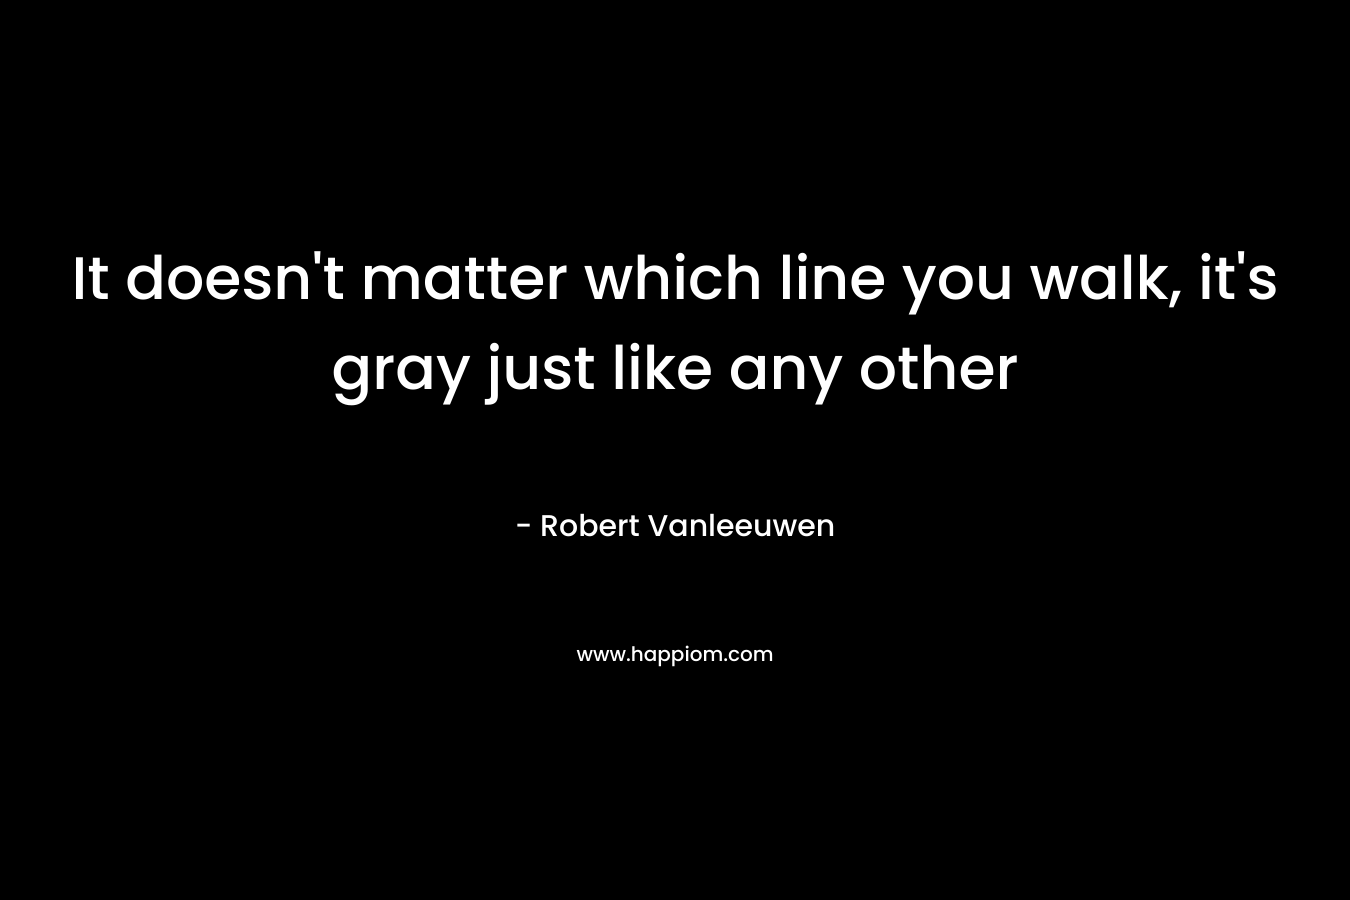 It doesn’t matter which line you walk, it’s gray just like any other – Robert Vanleeuwen